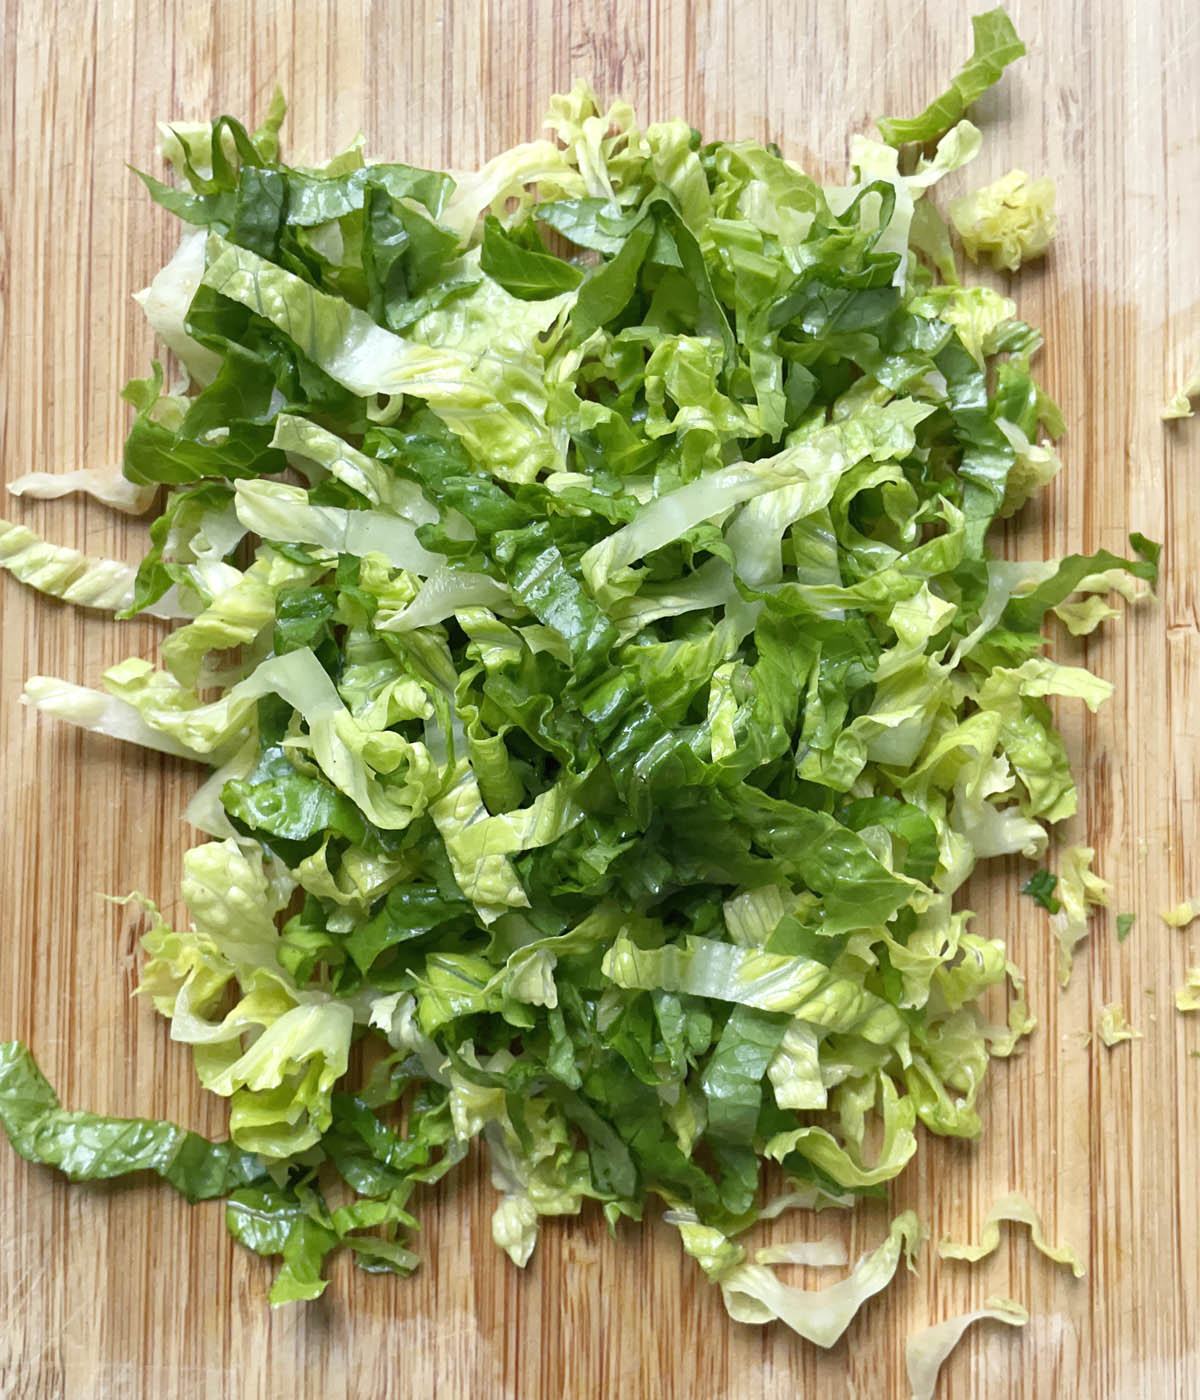 Finely chopped lettuce on a wooden cutting board.